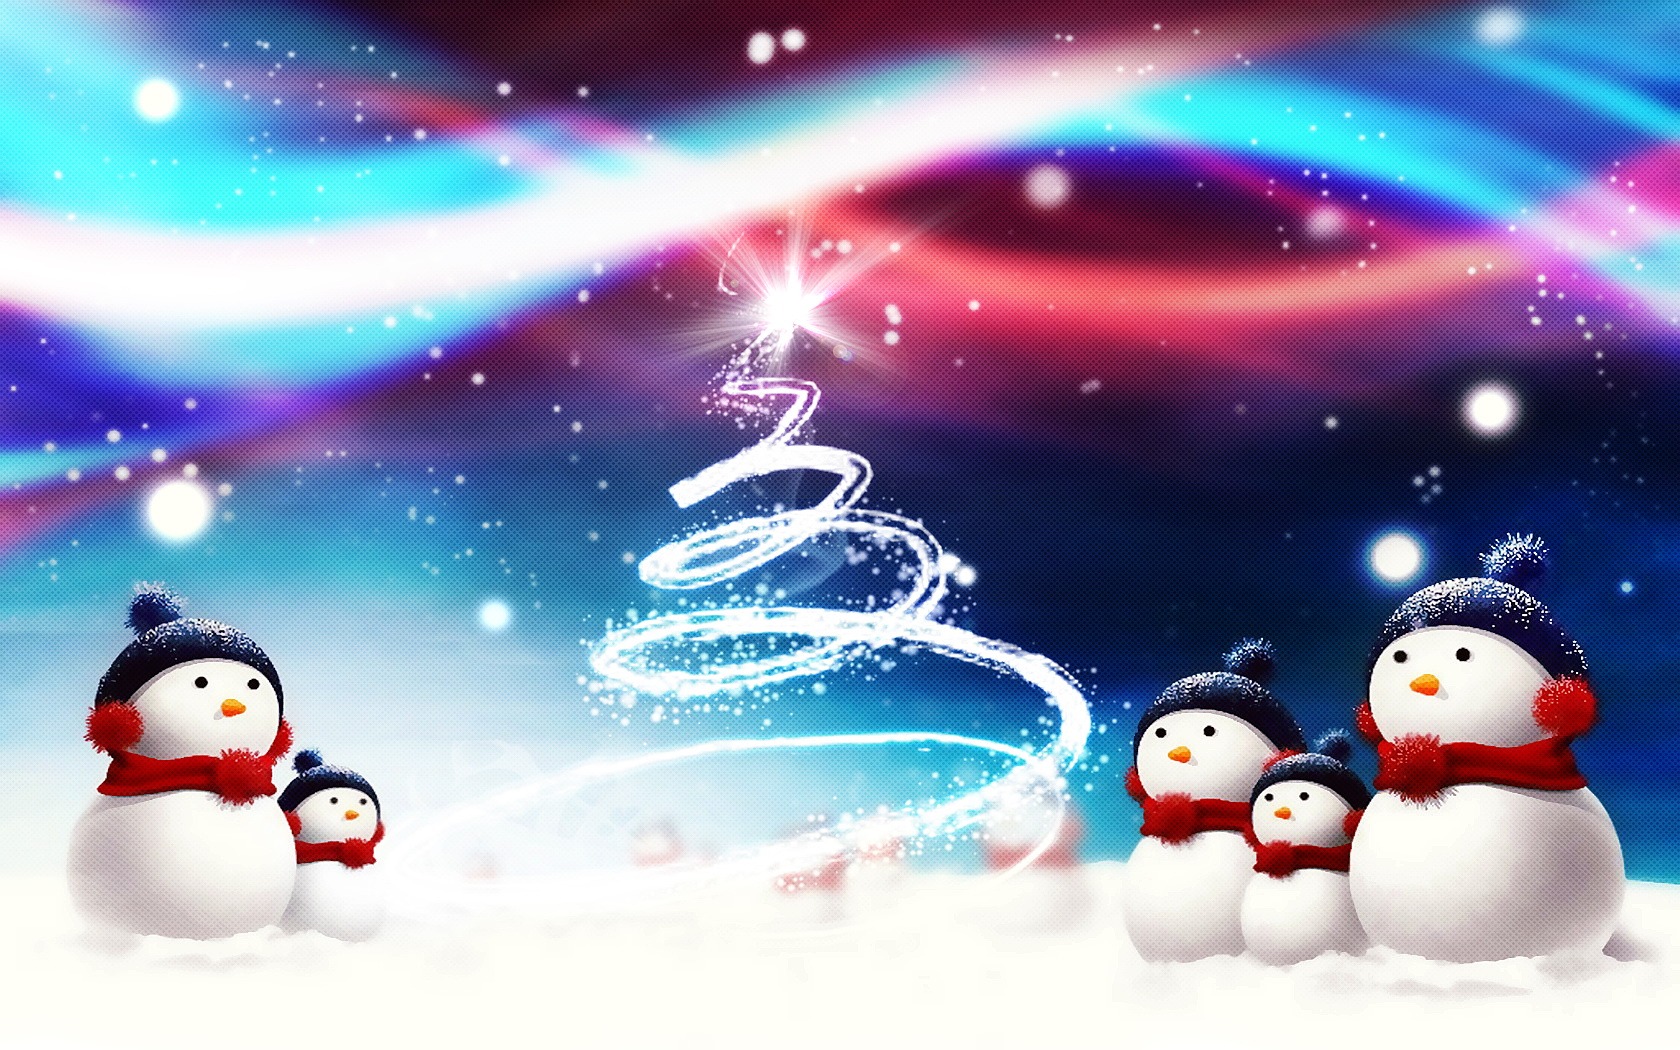 Ideas About Animated Christmas Wallpaper On Pinterest - Christmas Card Designs Animated - HD Wallpaper 